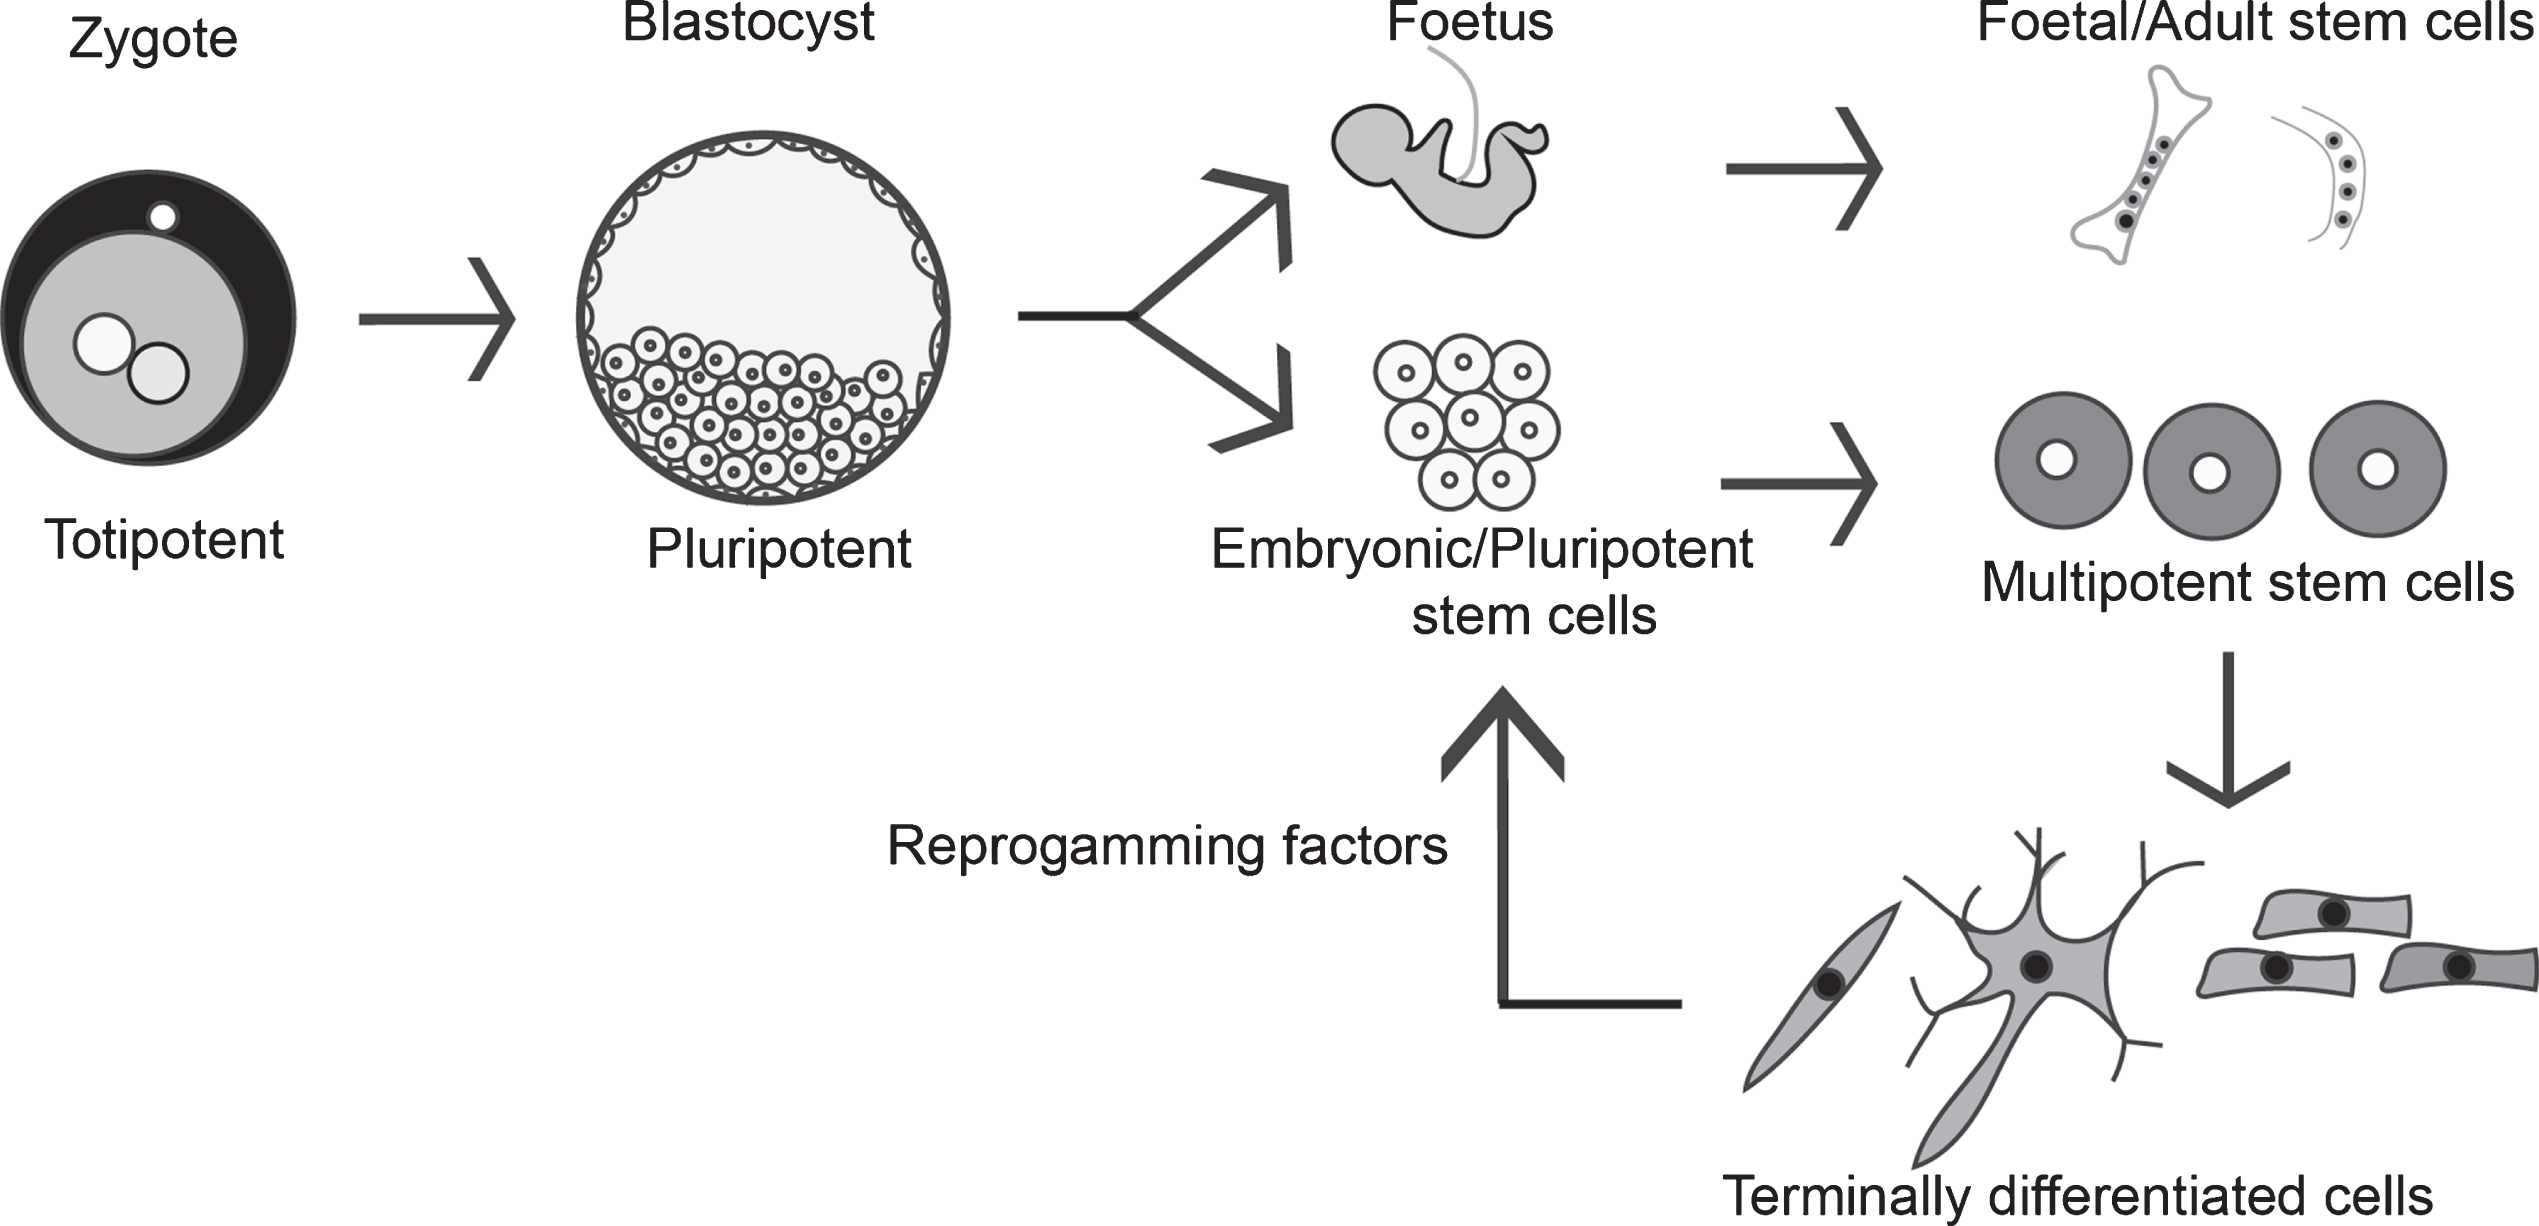 Stem cell types and characterization: Totipotent stem cells can form embryonic and extra embryonic tissue, and zygotic cells are the best example of such totipotent cells. Totipotent cells of the zygote develop into a blastocyst, and the cells of the inner cell mass can be isolated and cultured as embryonic stem cells (ESC), which are pluripotent (i.e., can form embryonic cells but not extra embryonic cell types). Multipotent stem cells like MSCs and HSCs can give rise to multiple cell types, and MSCs can be found in the developing fetus, umbilical cord, and in adult tissues like the bone marrow. Terminally differentiated cells can be reprogrammed to become pluripotent cells by exposing them to certain signals called the reprogramming factors, and such cells are called induced pluripotent stem cells (iPSC).